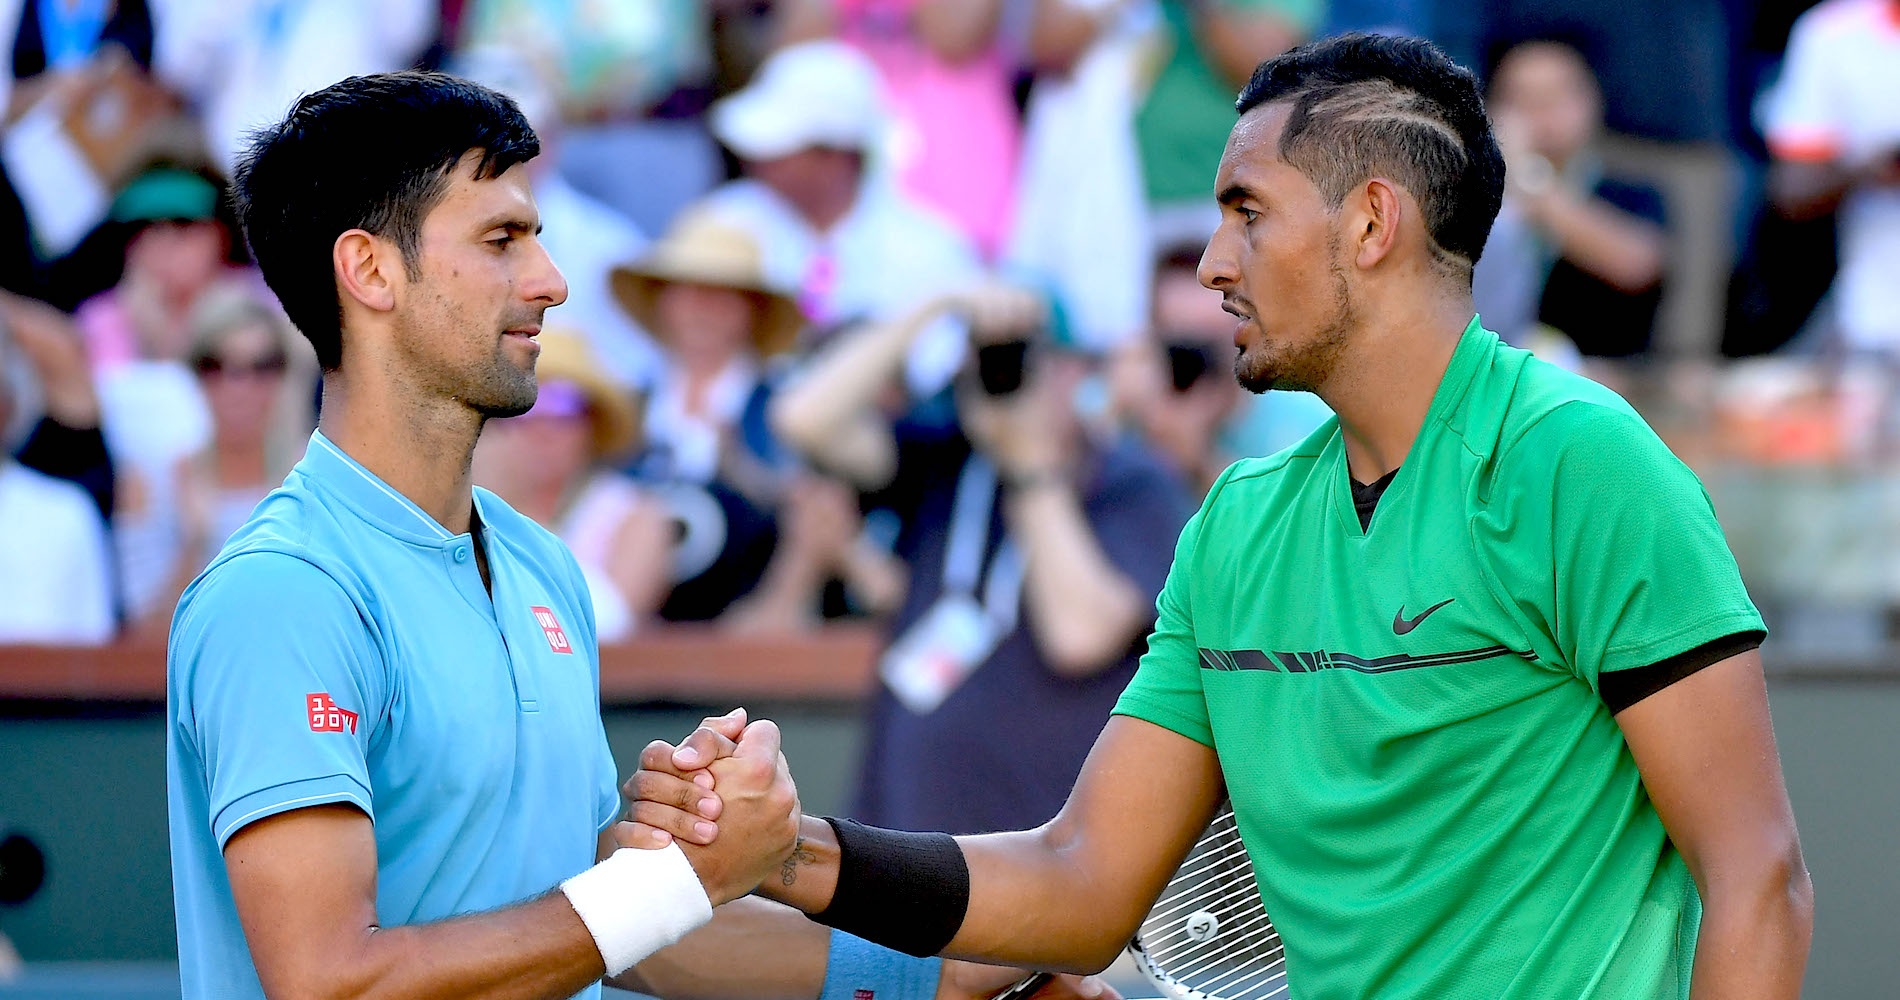 Australian Open Djokovic doesnt have much respect for Kyrgios